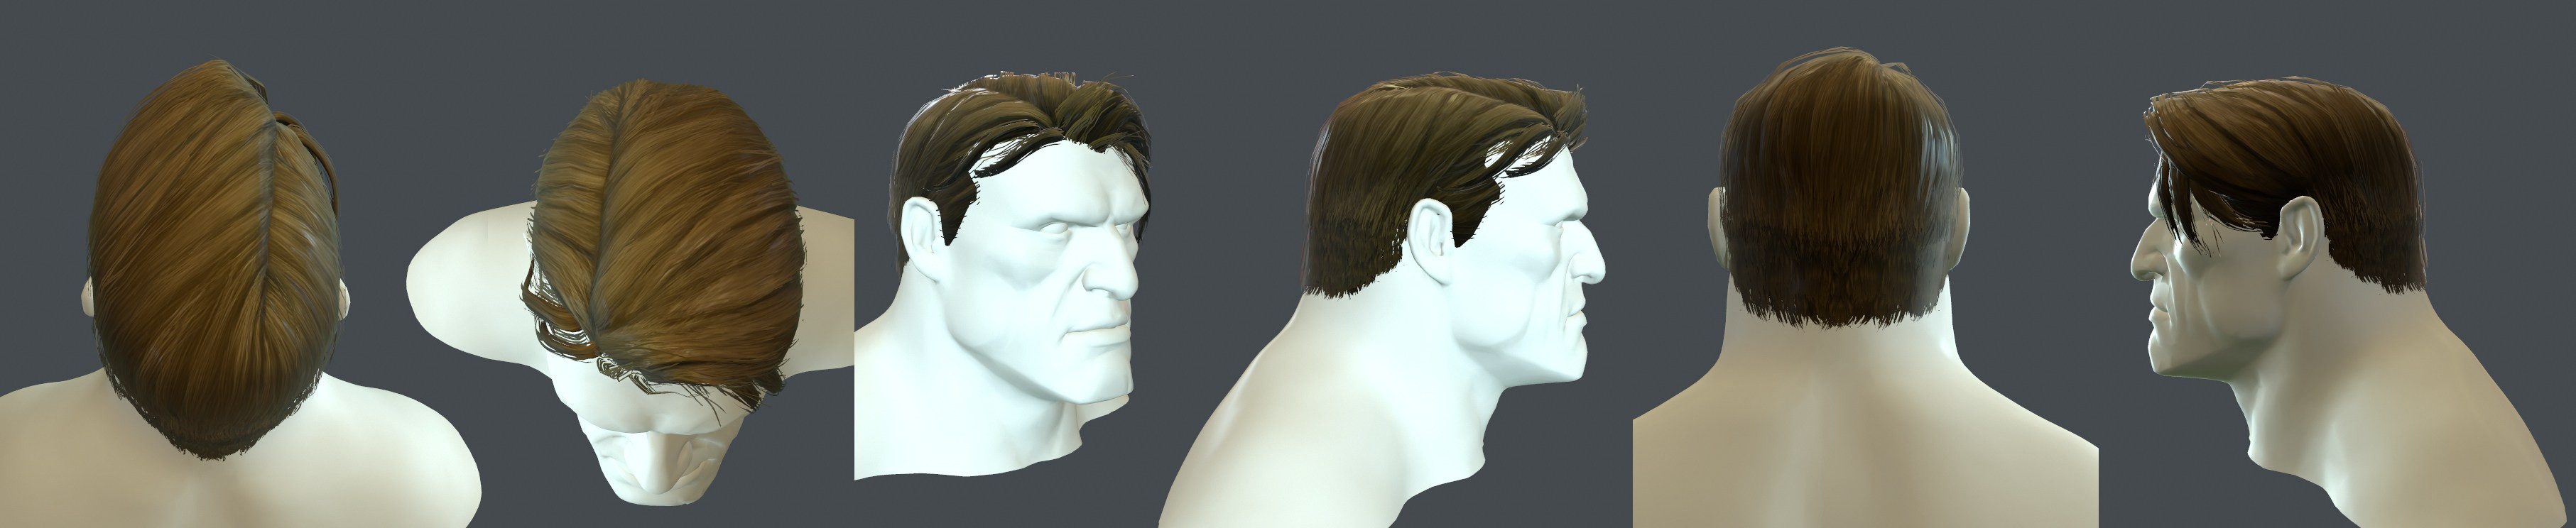 I designed and modeled this hair prototype with Marmoset.